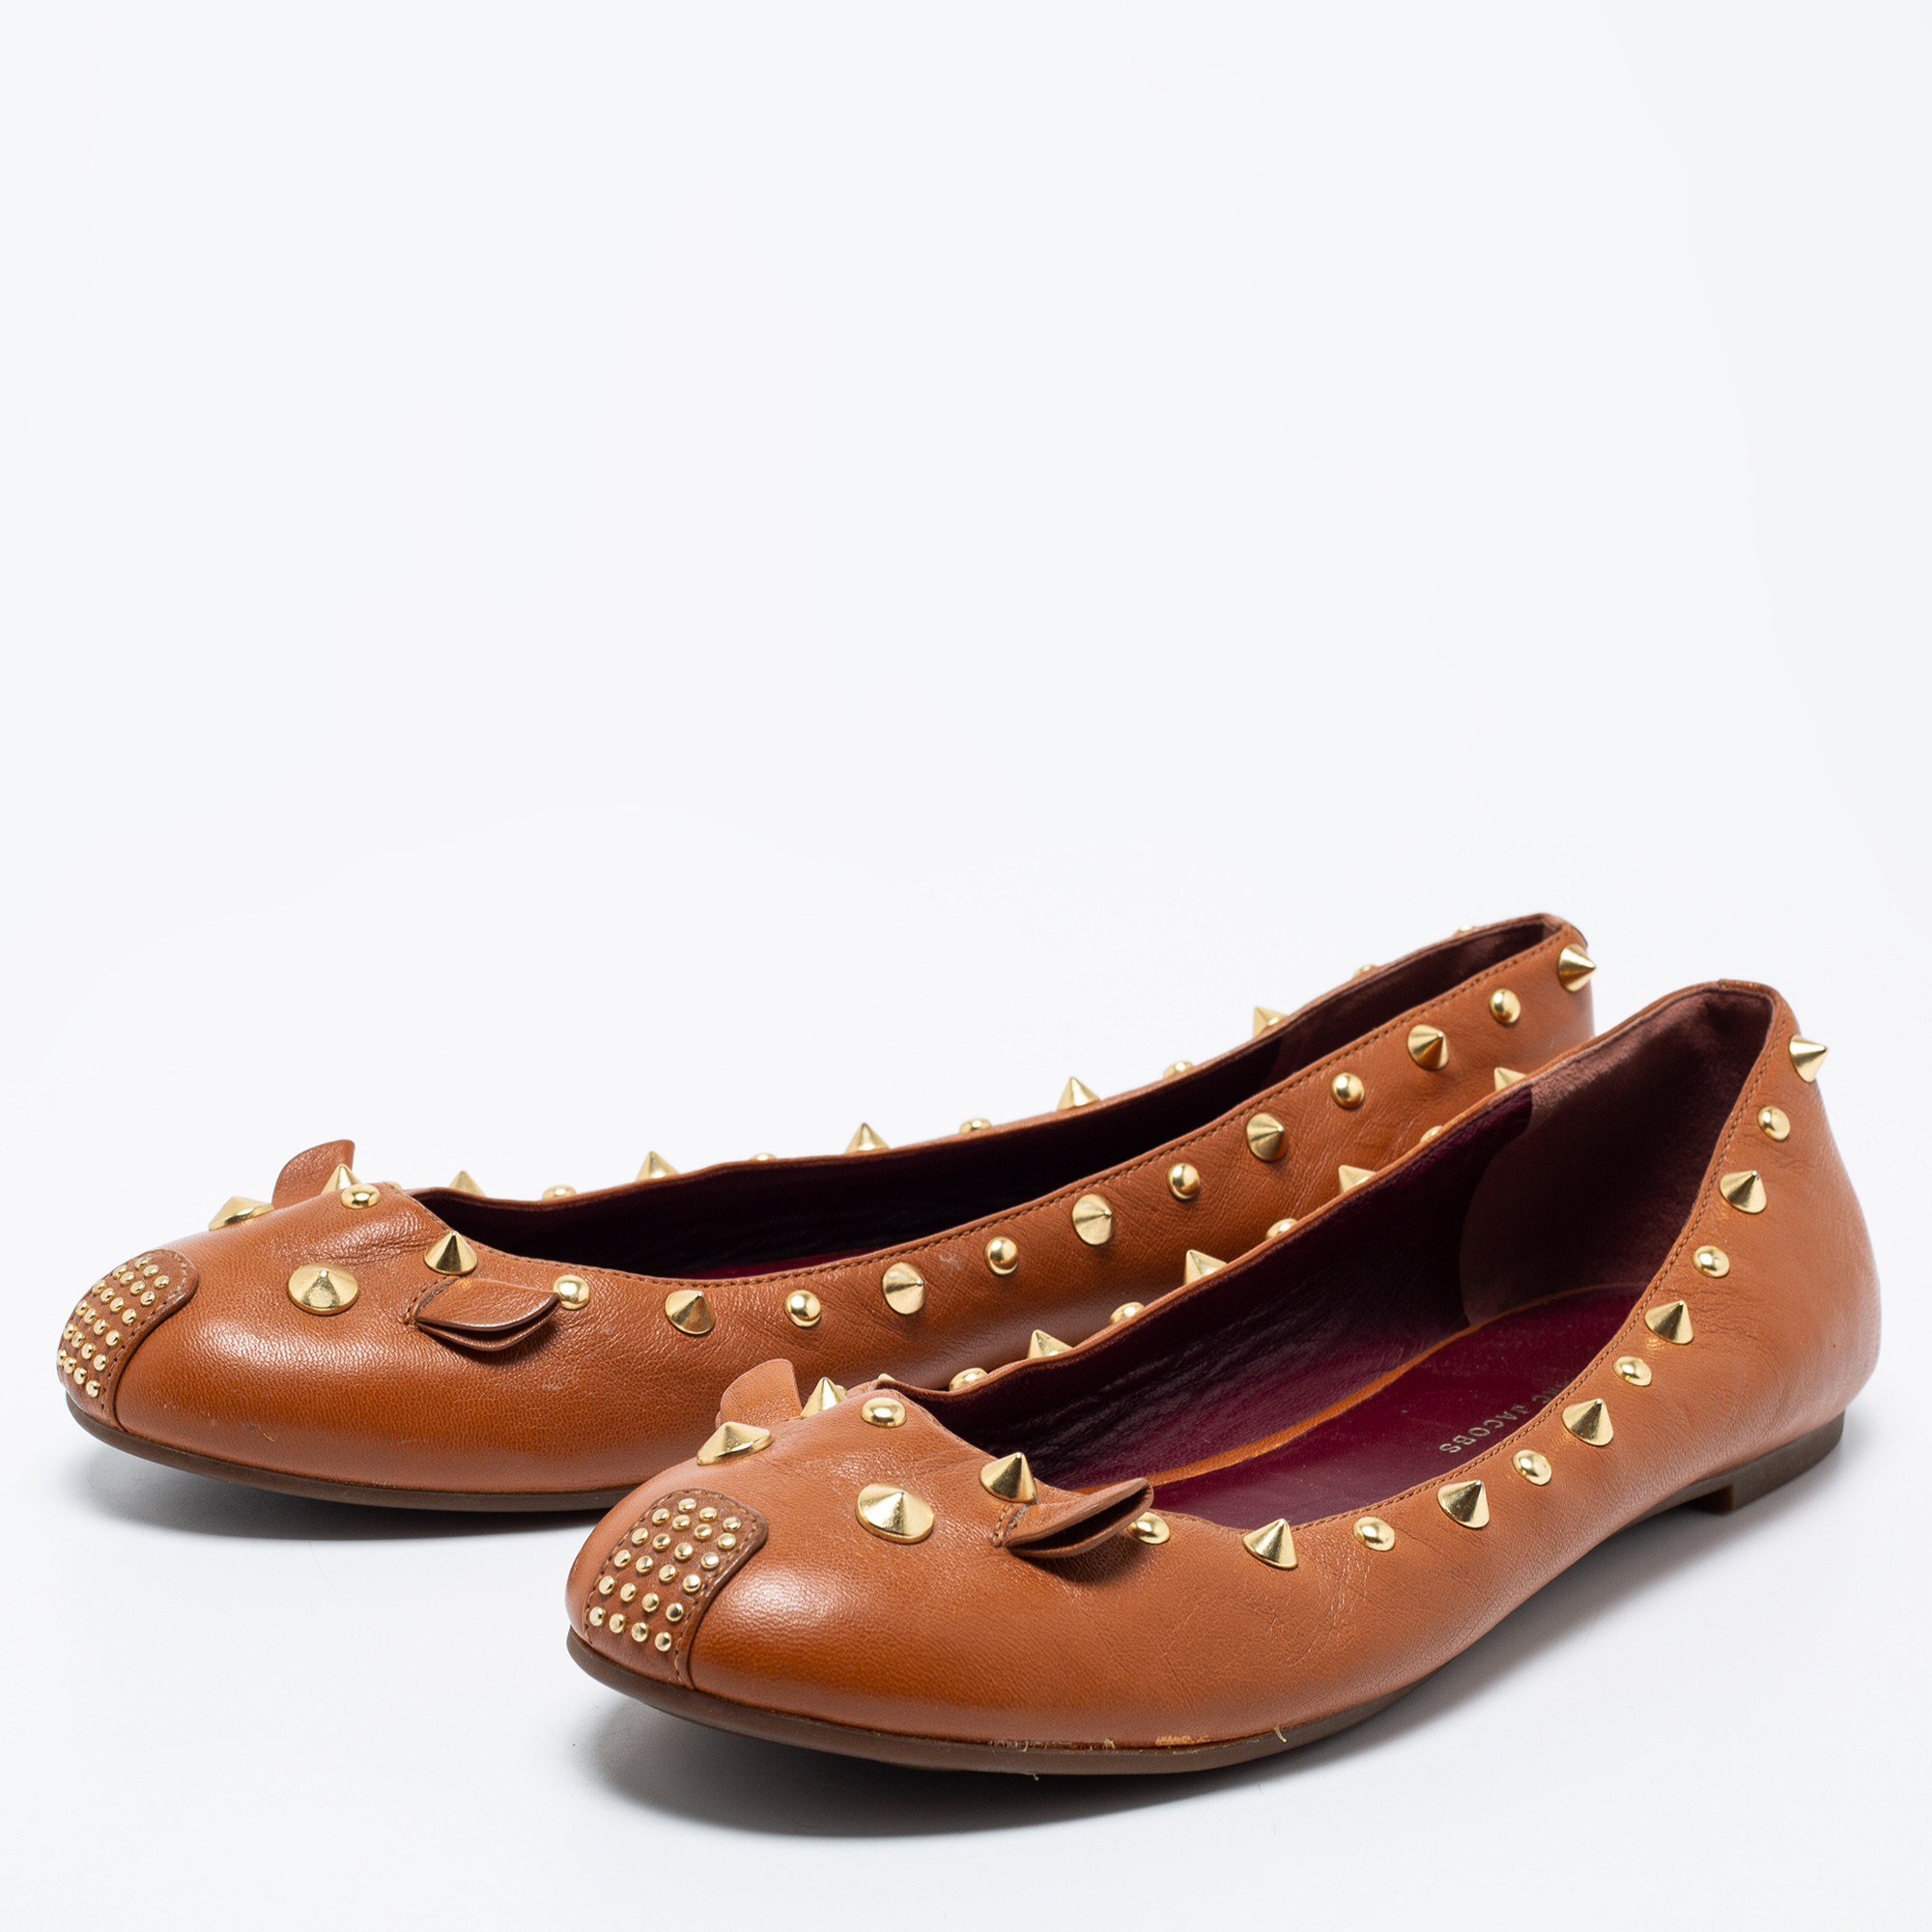 

Marc by Marc Jacobs Brown Leather Spike Mouse Ballet Flats Size